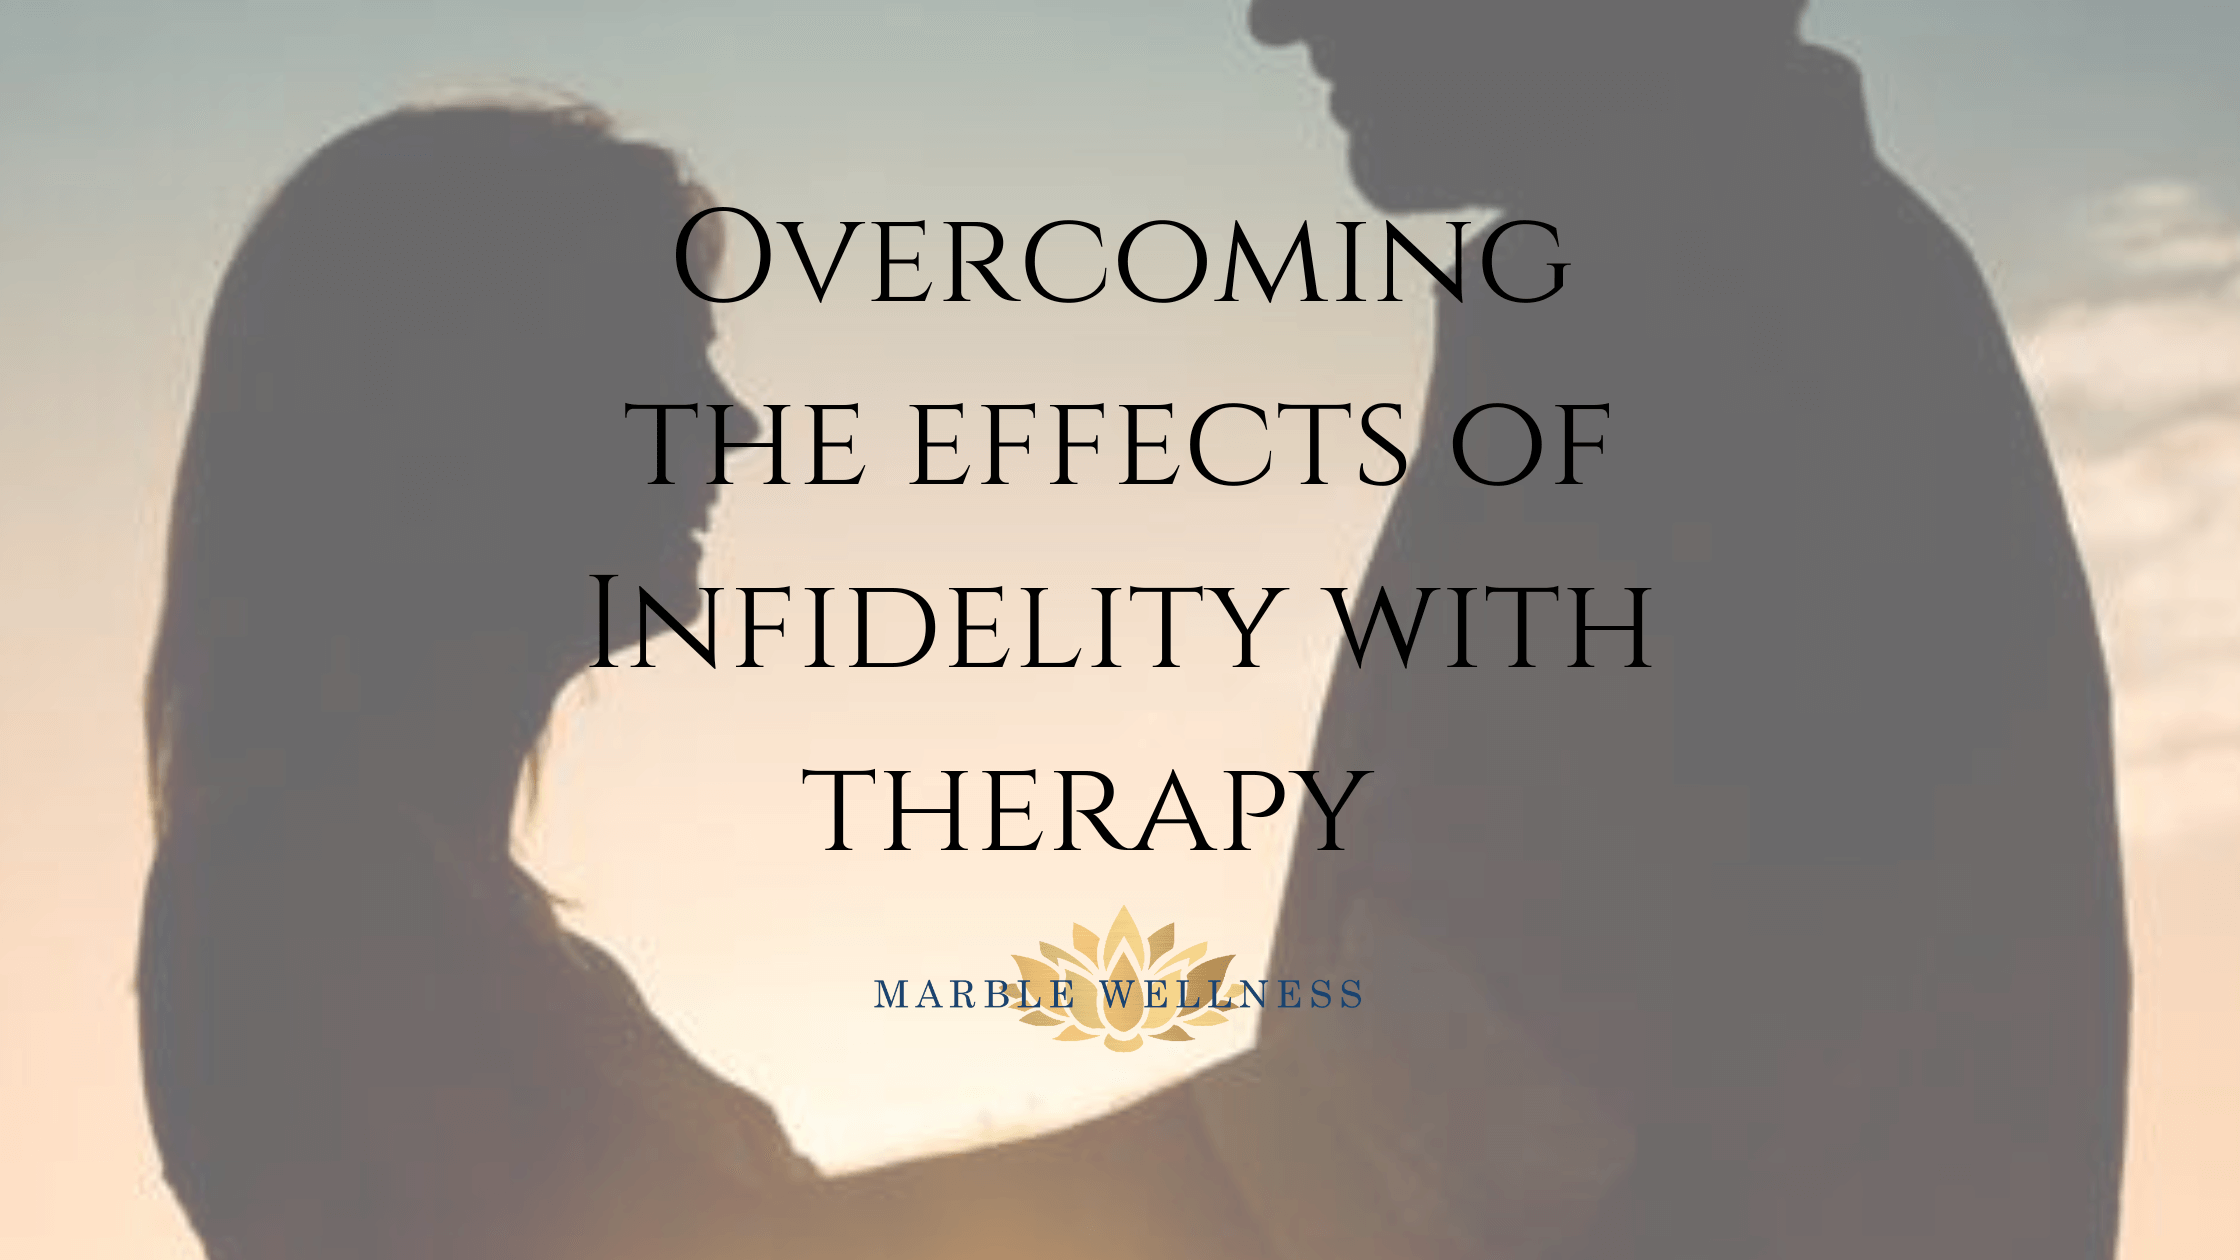 Blog title: Overcoming the Effects of Infidelity with Therapy in St. Louis, MO